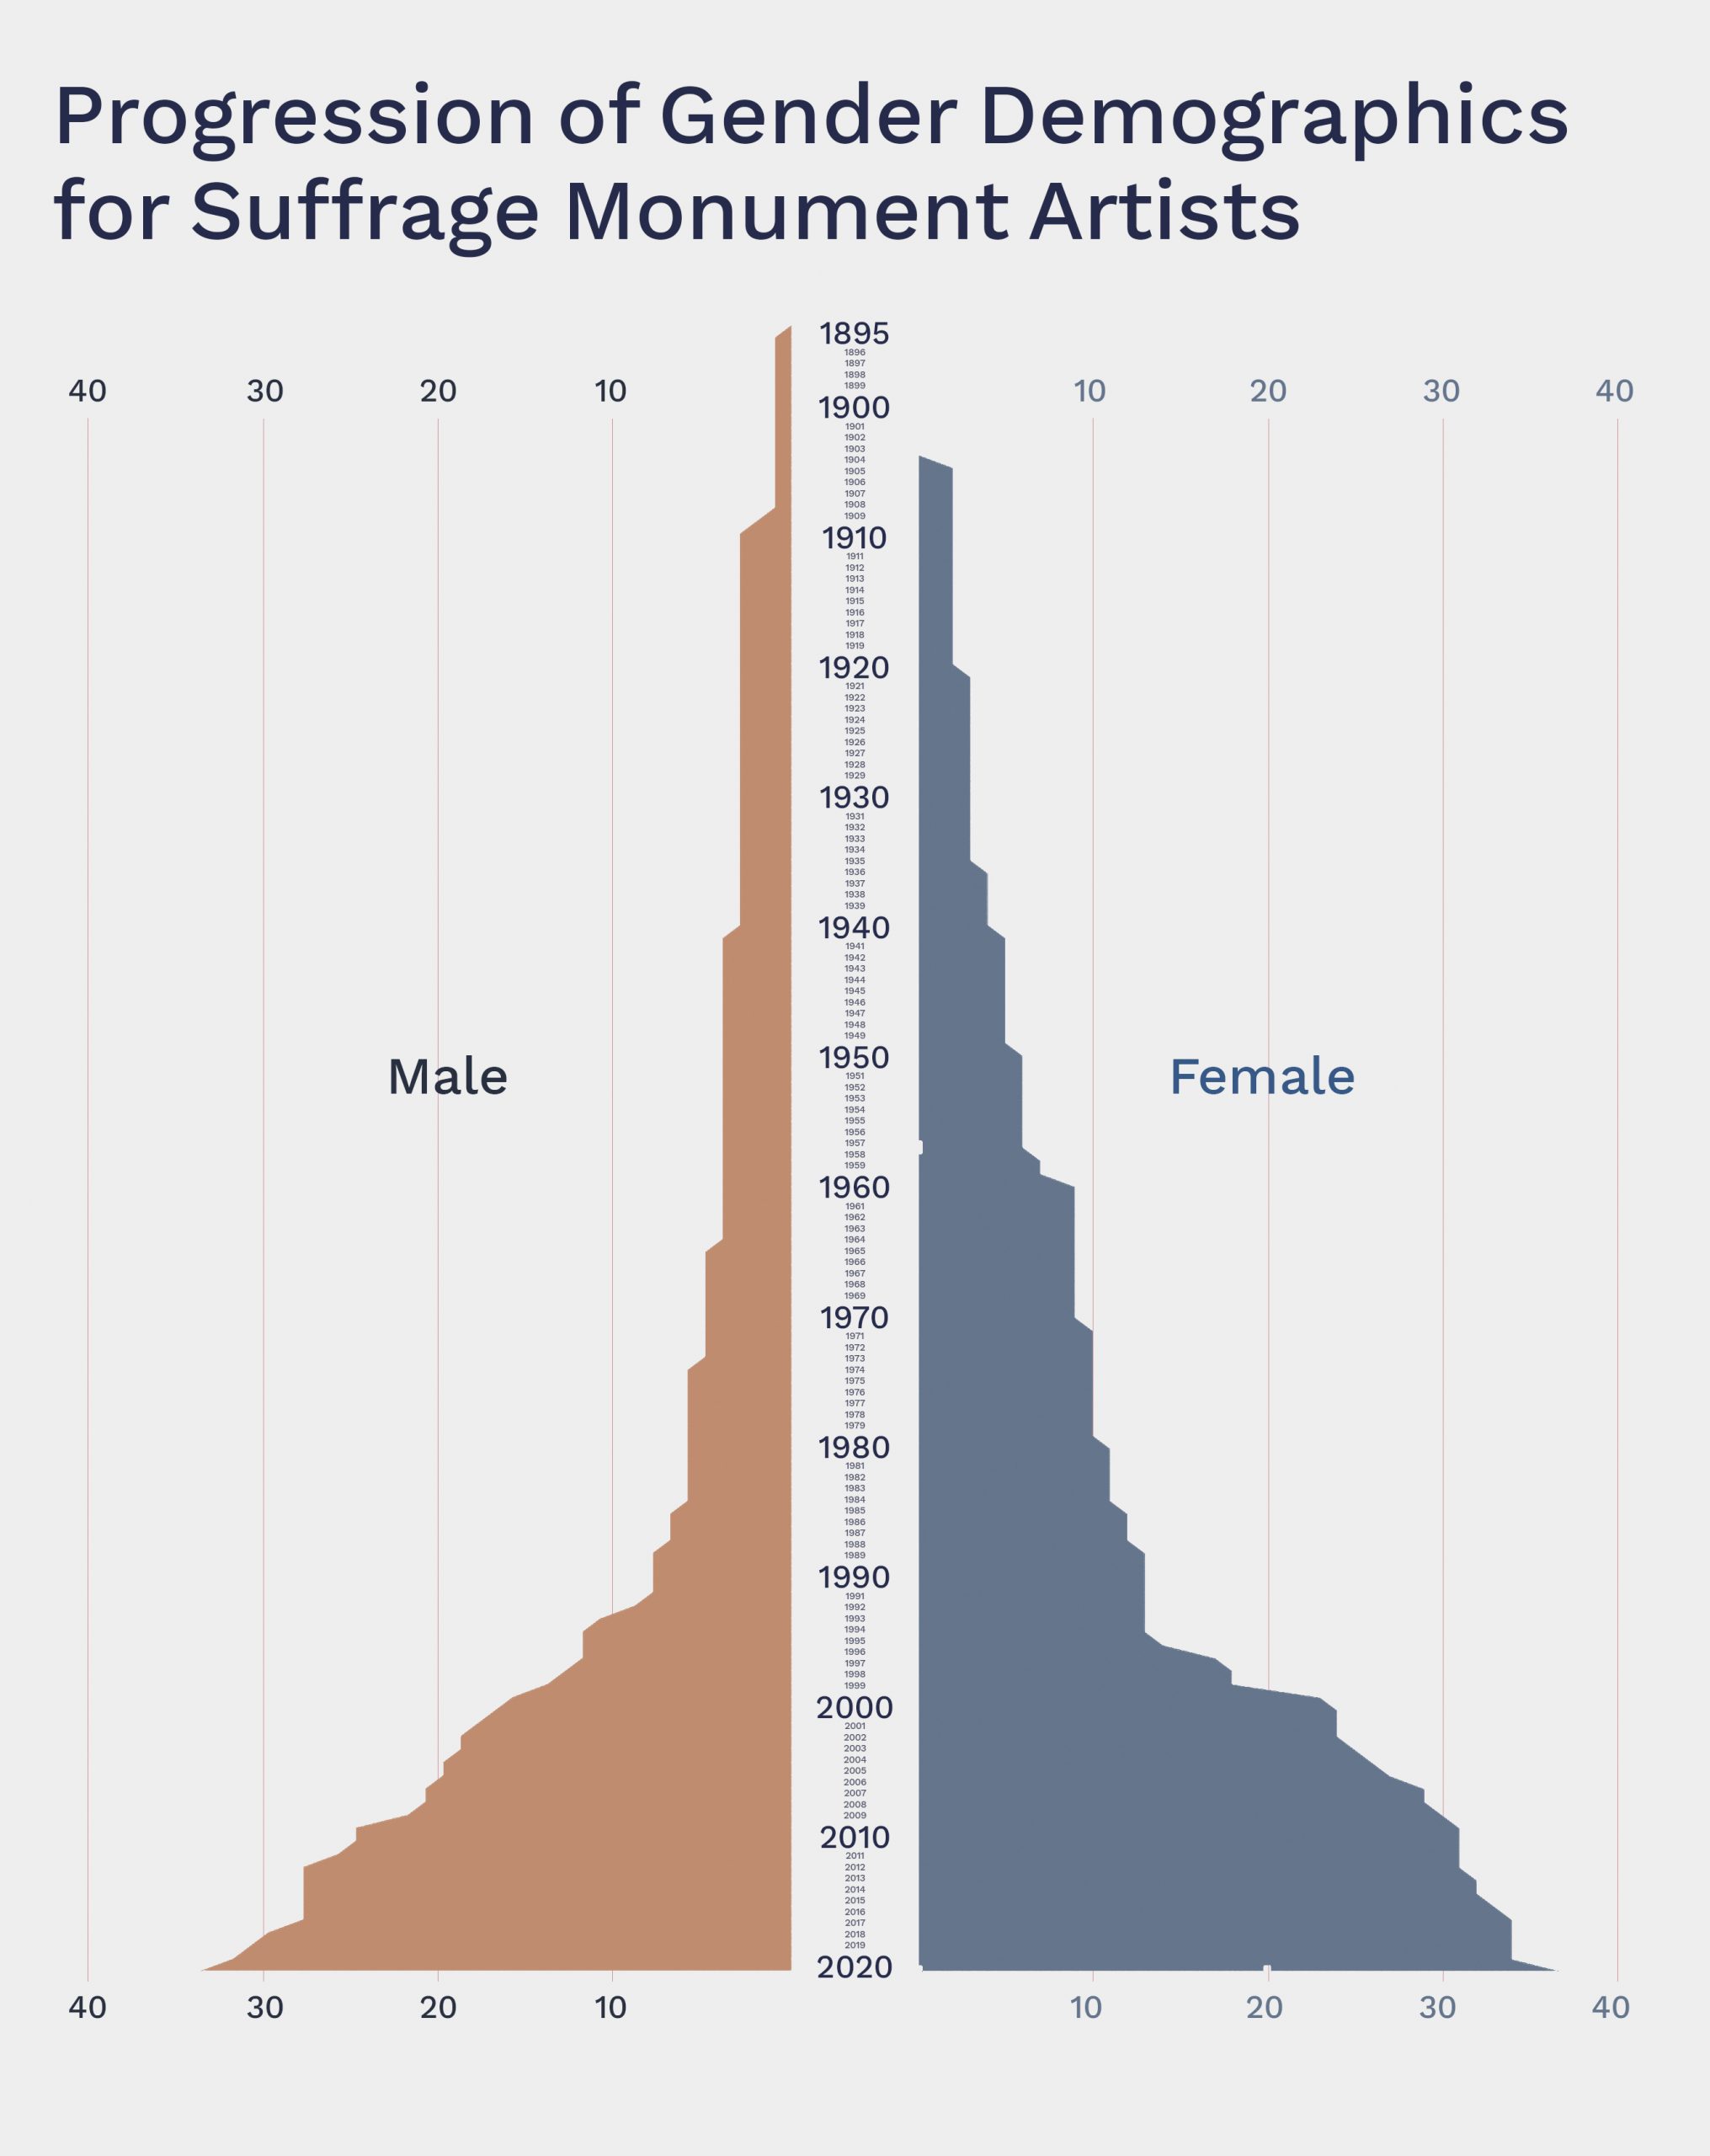 Graph showing progression of male versus female artists for US suffrage monuments